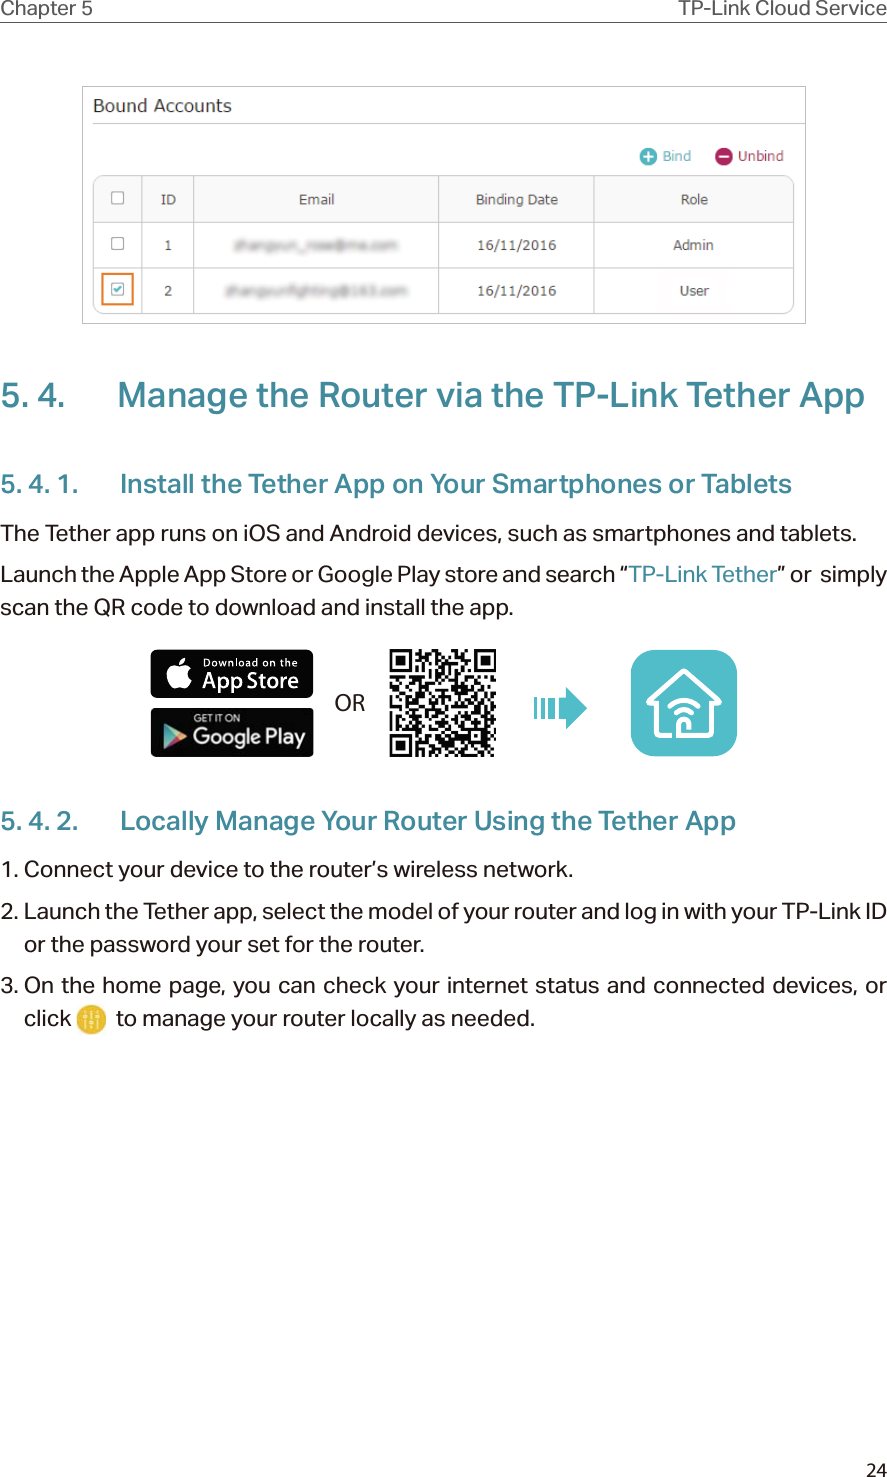 24Chapter 5 TP-Link Cloud Service 5. 4.  Manage the Router via the TP-Link Tether App5. 4. 1.  Install the Tether App on Your Smartphones or TabletsThe Tether app runs on iOS and Android devices, such as smartphones and tablets.Launch the Apple App Store or Google Play store and search “TP-Link Tether” or  simply scan the QR code to download and install the app.OR5. 4. 2.  Locally Manage Your Router Using the Tether App1. Connect your device to the router’s wireless network.2. Launch the Tether app, select the model of your router and log in with your TP-Link ID or the password your set for the router. 3. On the home page, you can check your internet status and connected devices, or click    to manage your router locally as needed.